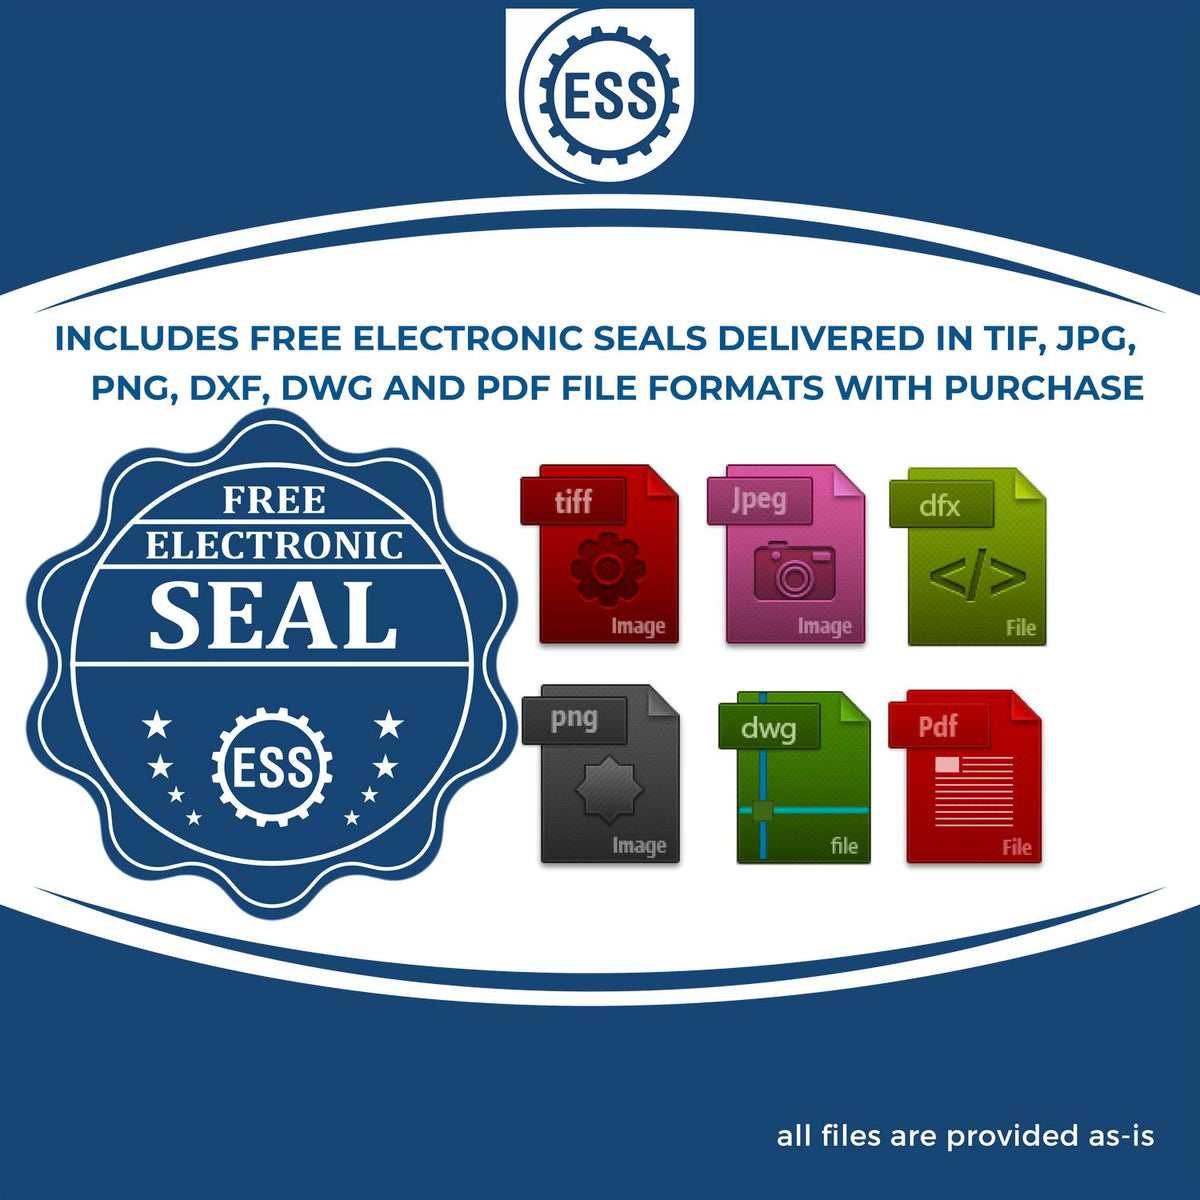 An infographic for the free electronic seal for the Premium MaxLight Pre-Inked Guam Engineering Stamp illustrating the different file type icons such as DXF, DWG, TIF, JPG and PNG.